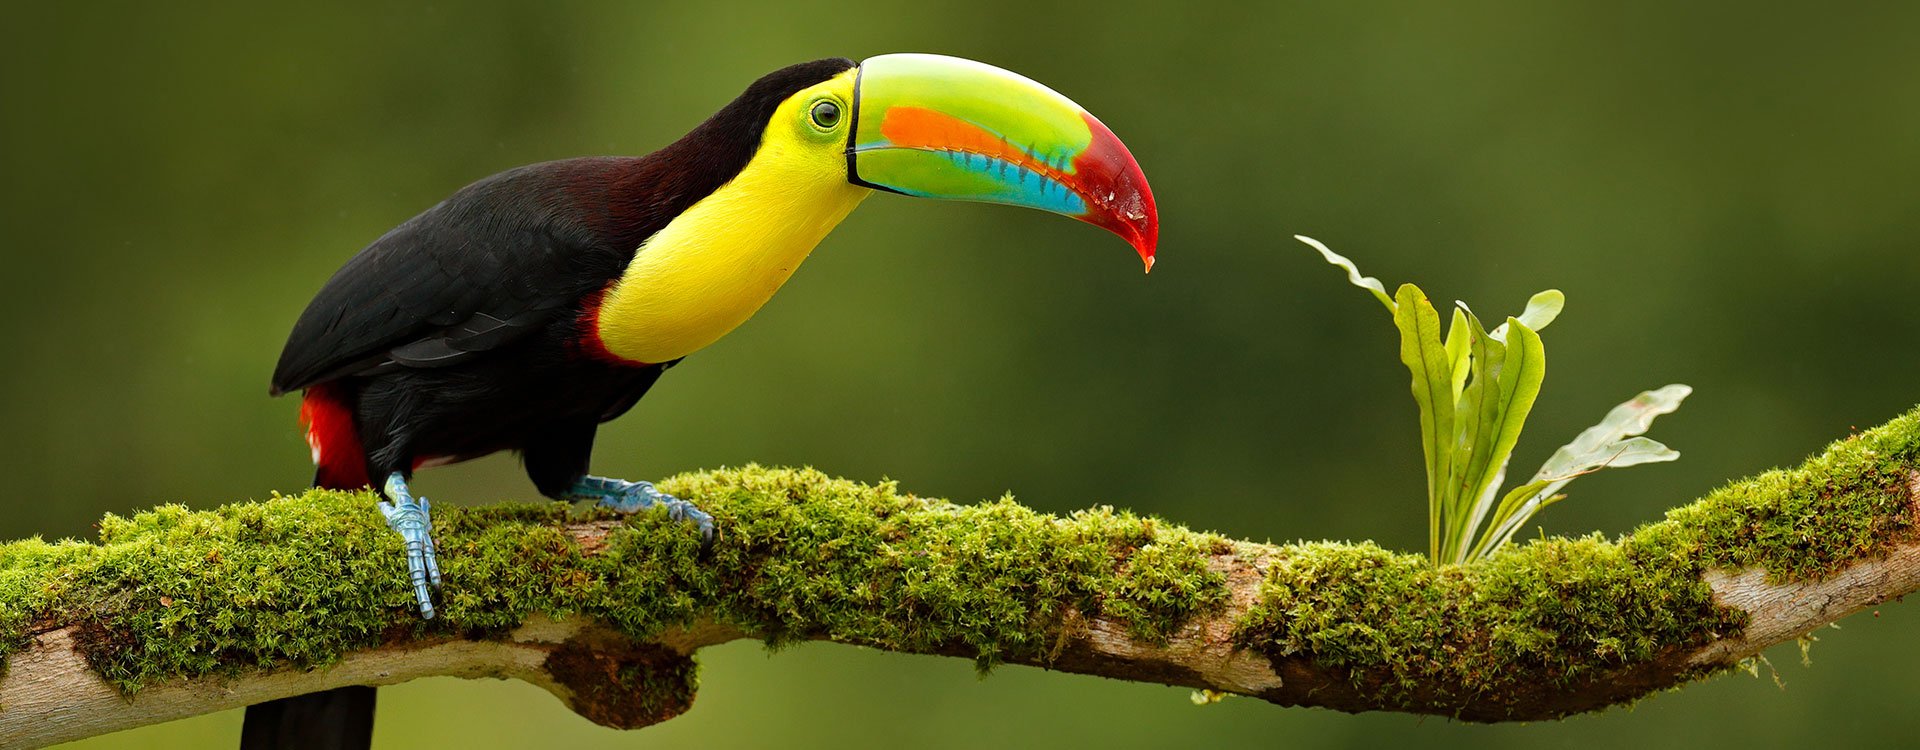 Keel-billed Toucan, sitting on the branch in the forest, Boca Tapada, Costa Rica. Nature travel in central America